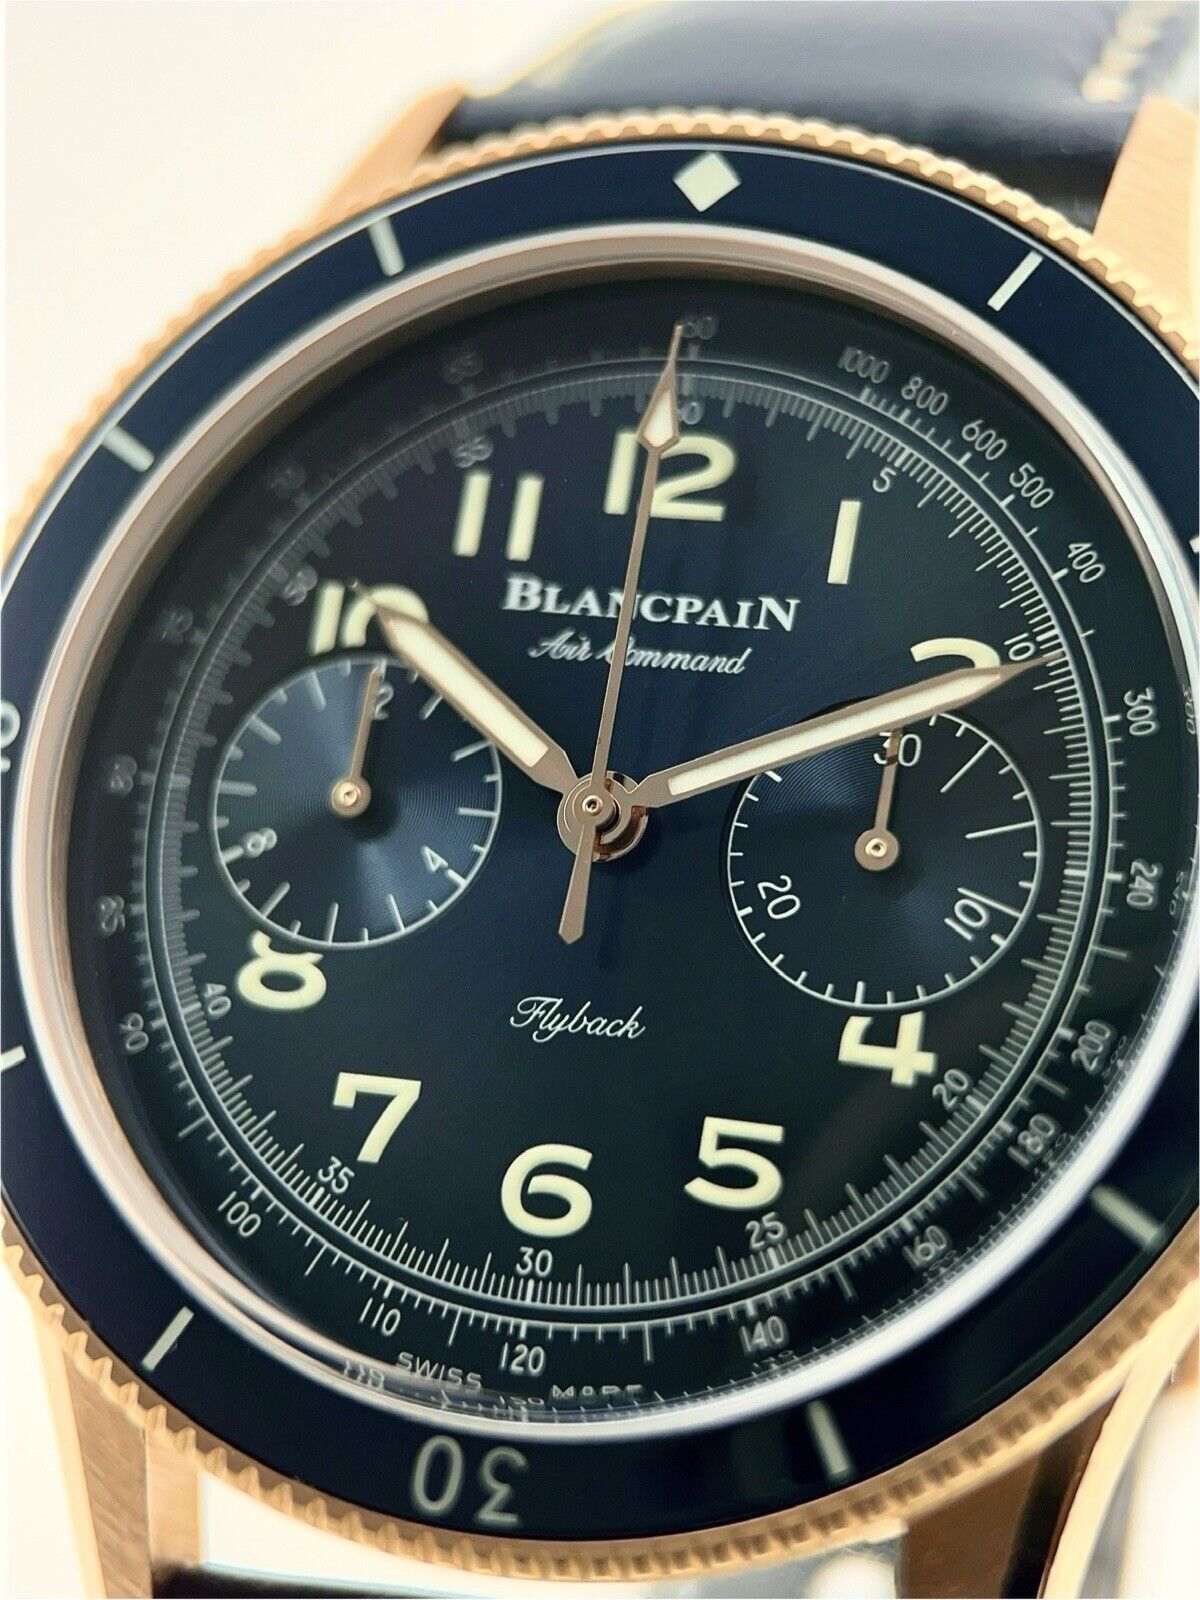 2023 Blancpain Air Command Flyback Chronograph 18k Rose Gold Watch - Box/Papers